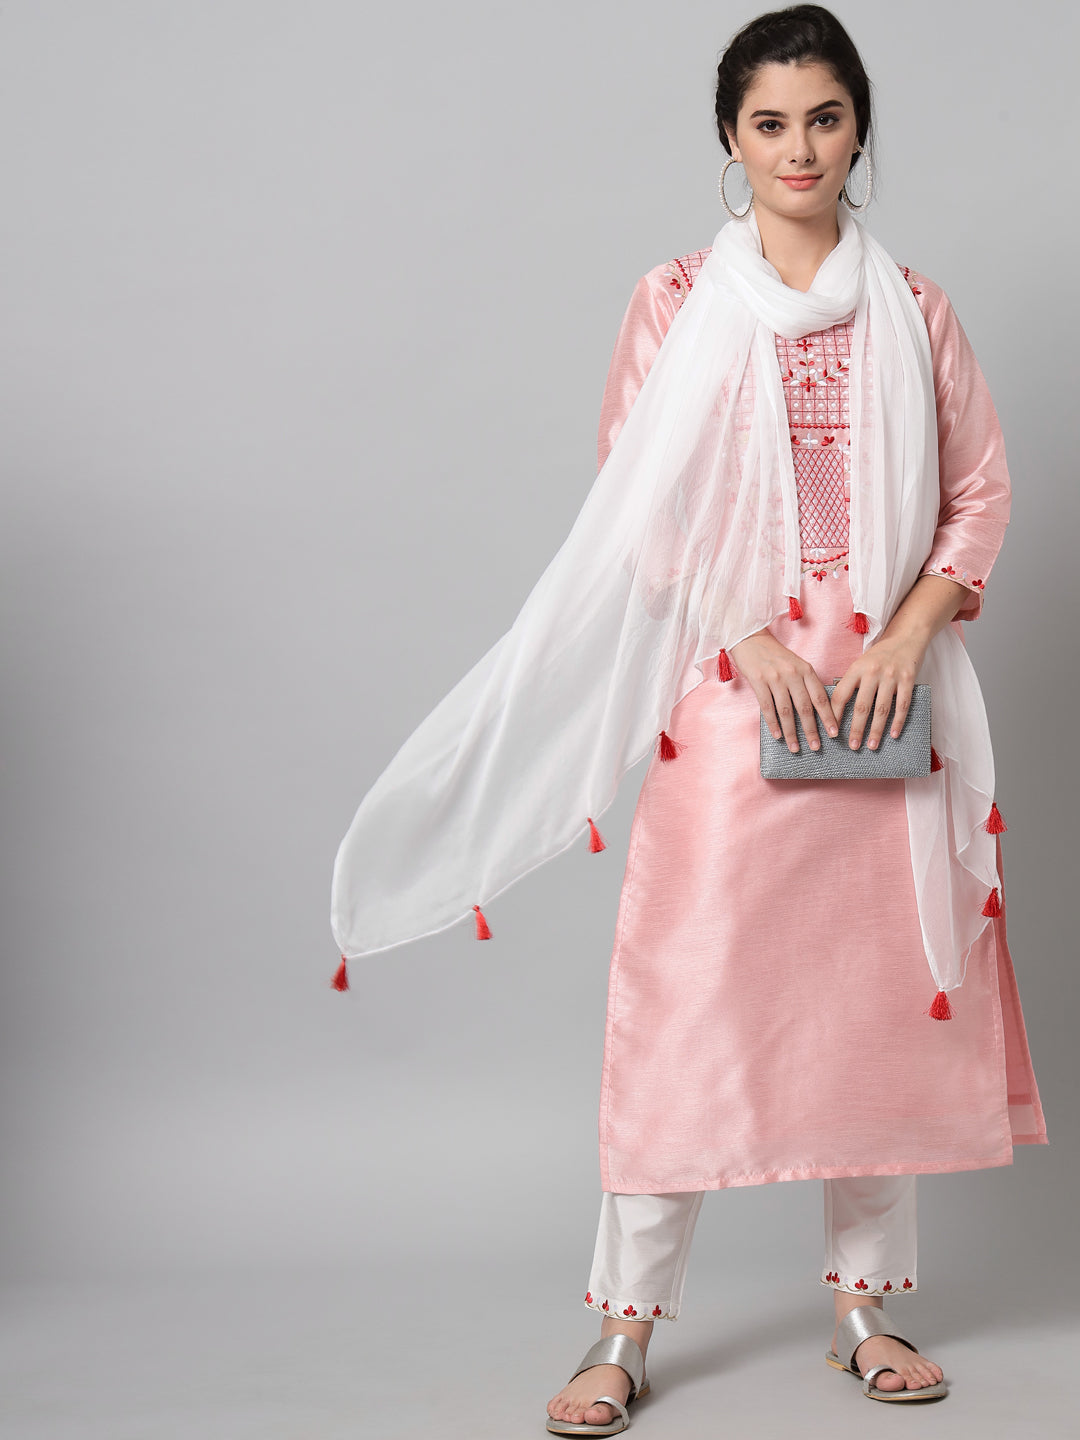 Women's Pink Kurta Trouser Set With White And Red Floral Embroidery - Noz2Toz